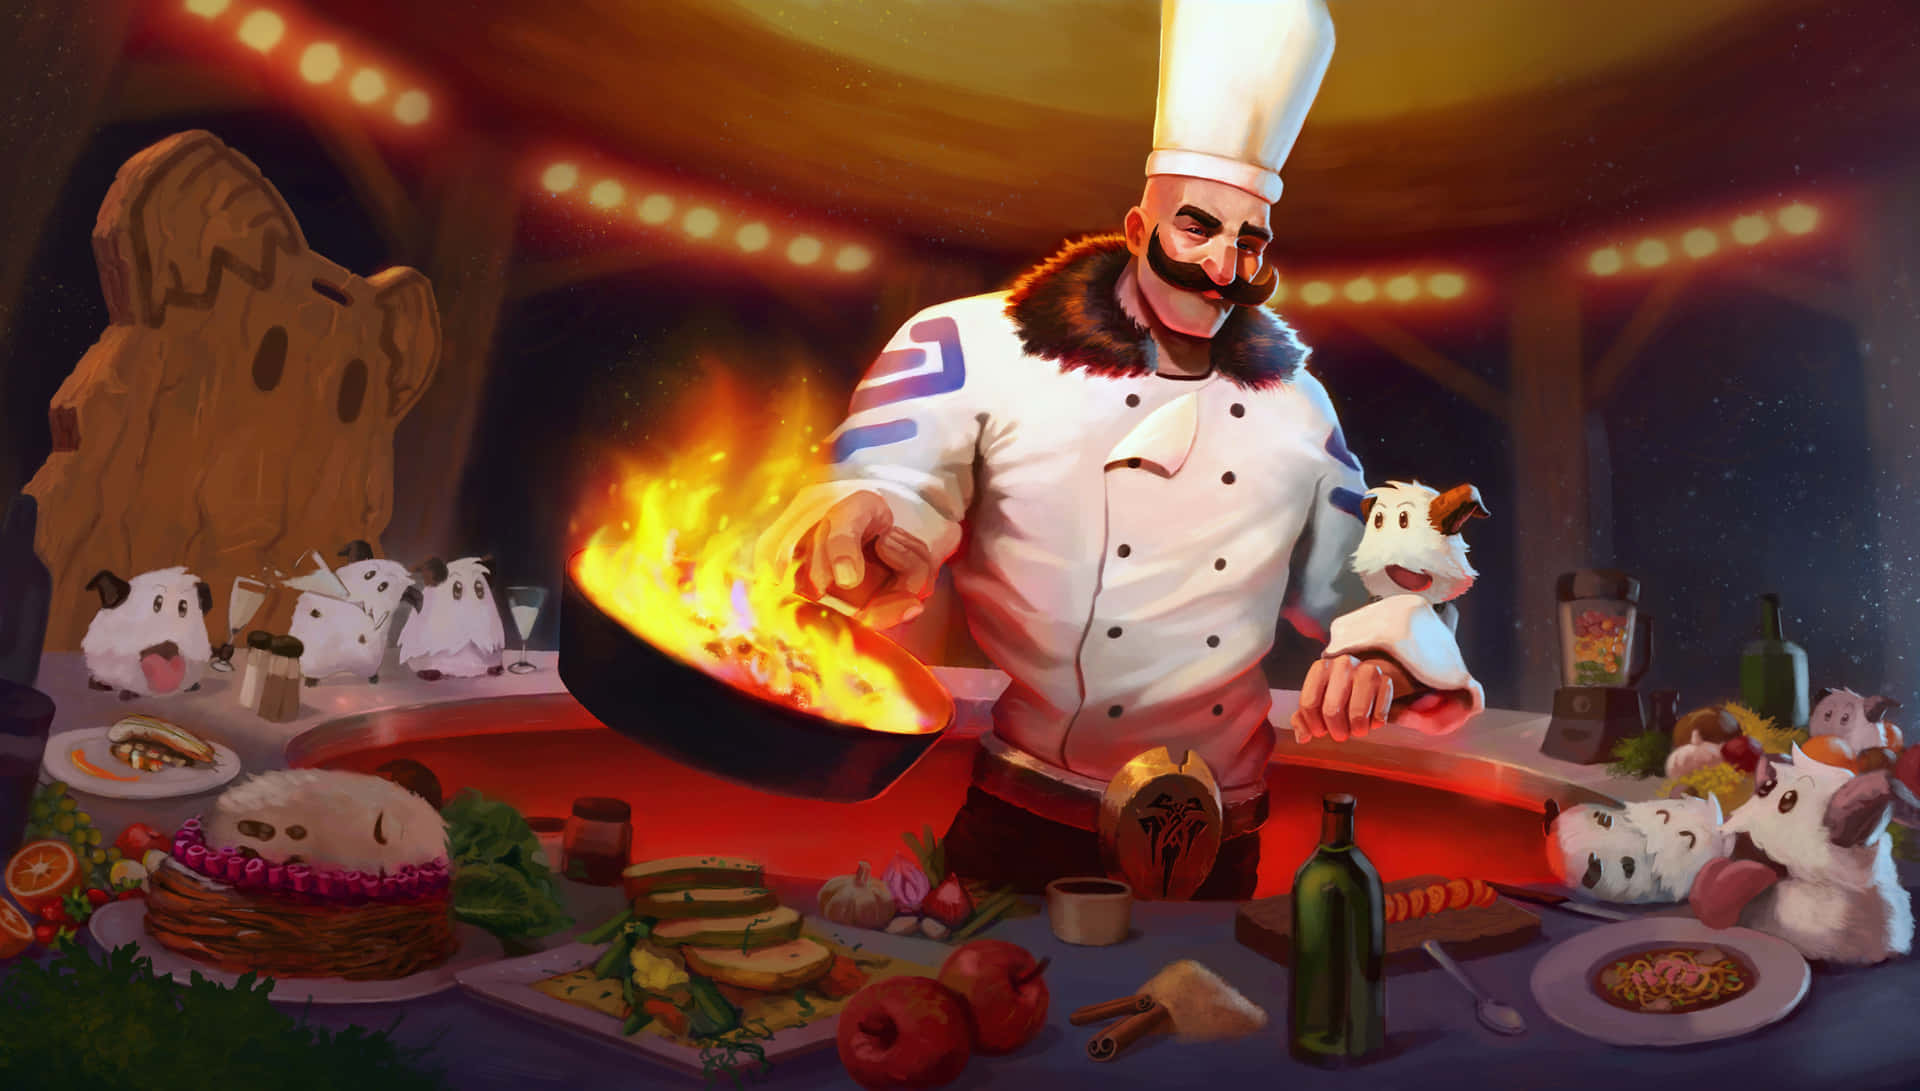 A Chef Is Cooking Food In Front Of A Fire